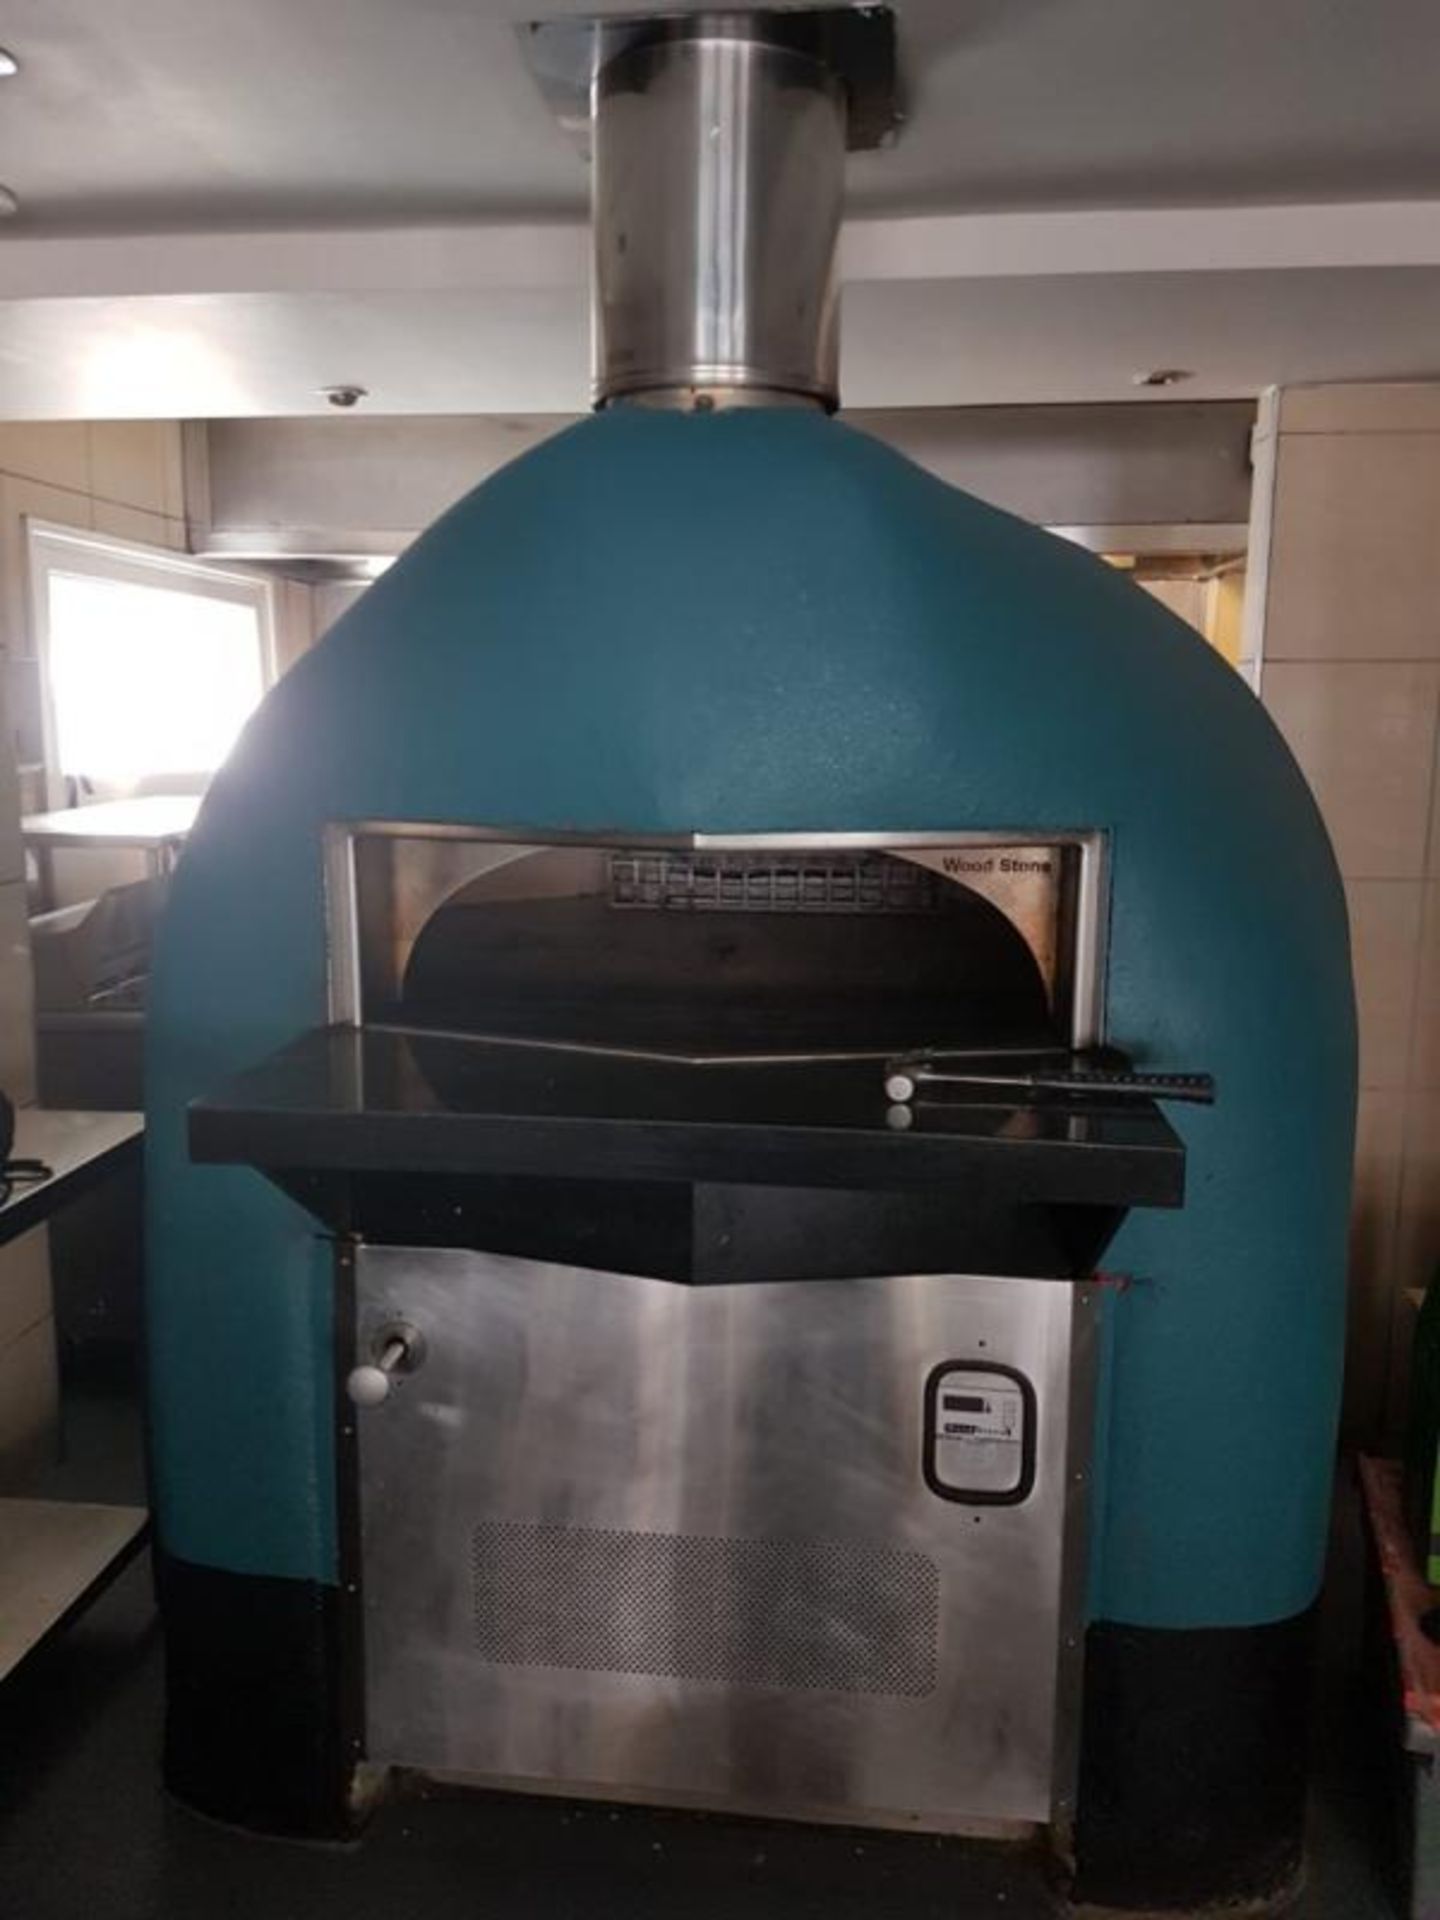 1 x Wood Stone Mountain Series Commercial Gas Fired Artisan Pizza Oven With Insulated Clad Body - - Image 10 of 13